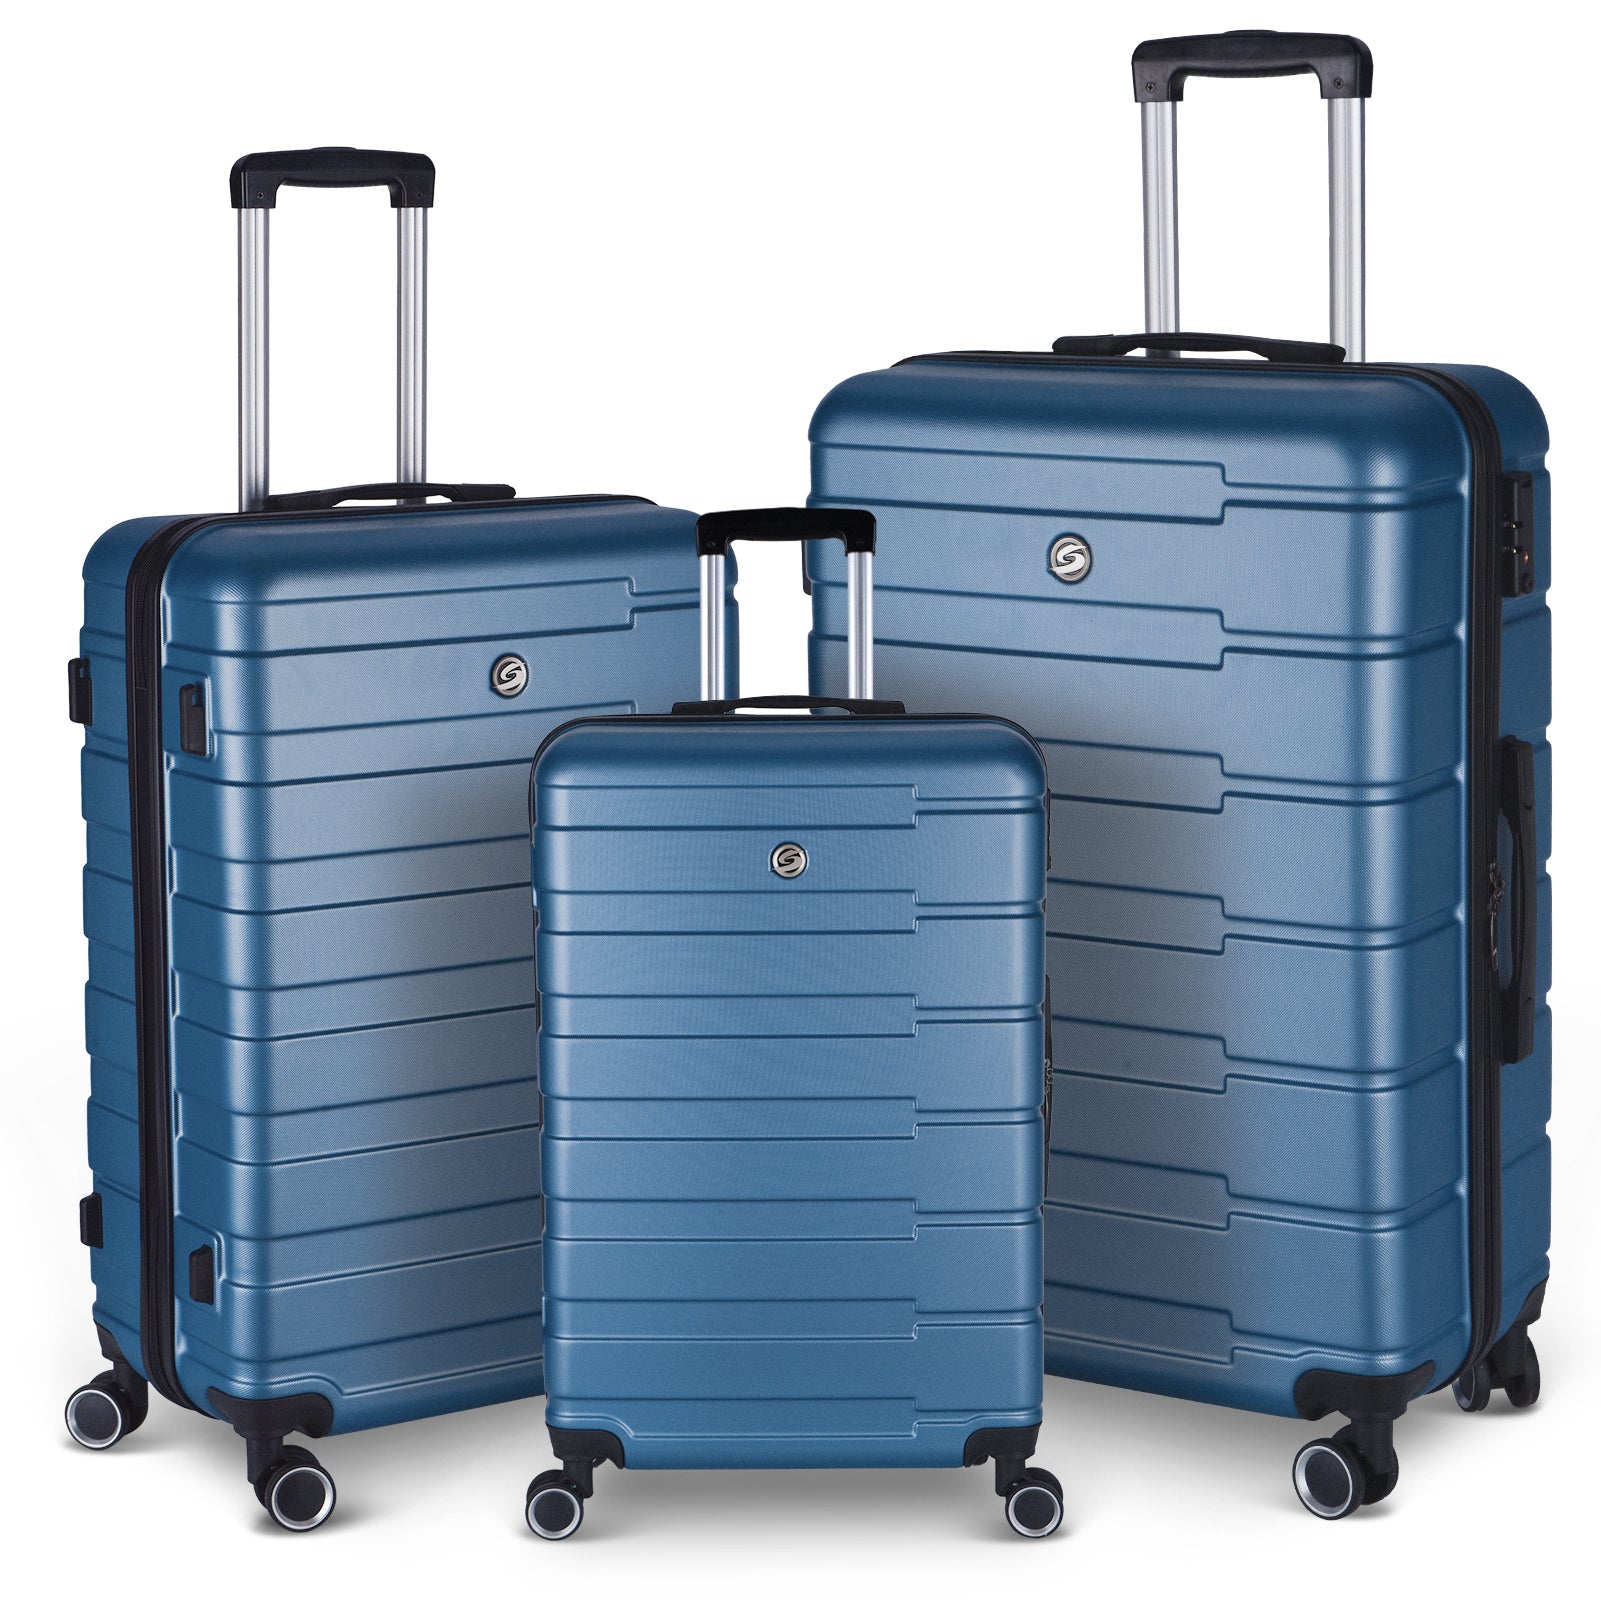 Luggage Suitcase 3 Piece Sets Hardside Carry on dark blue-abs